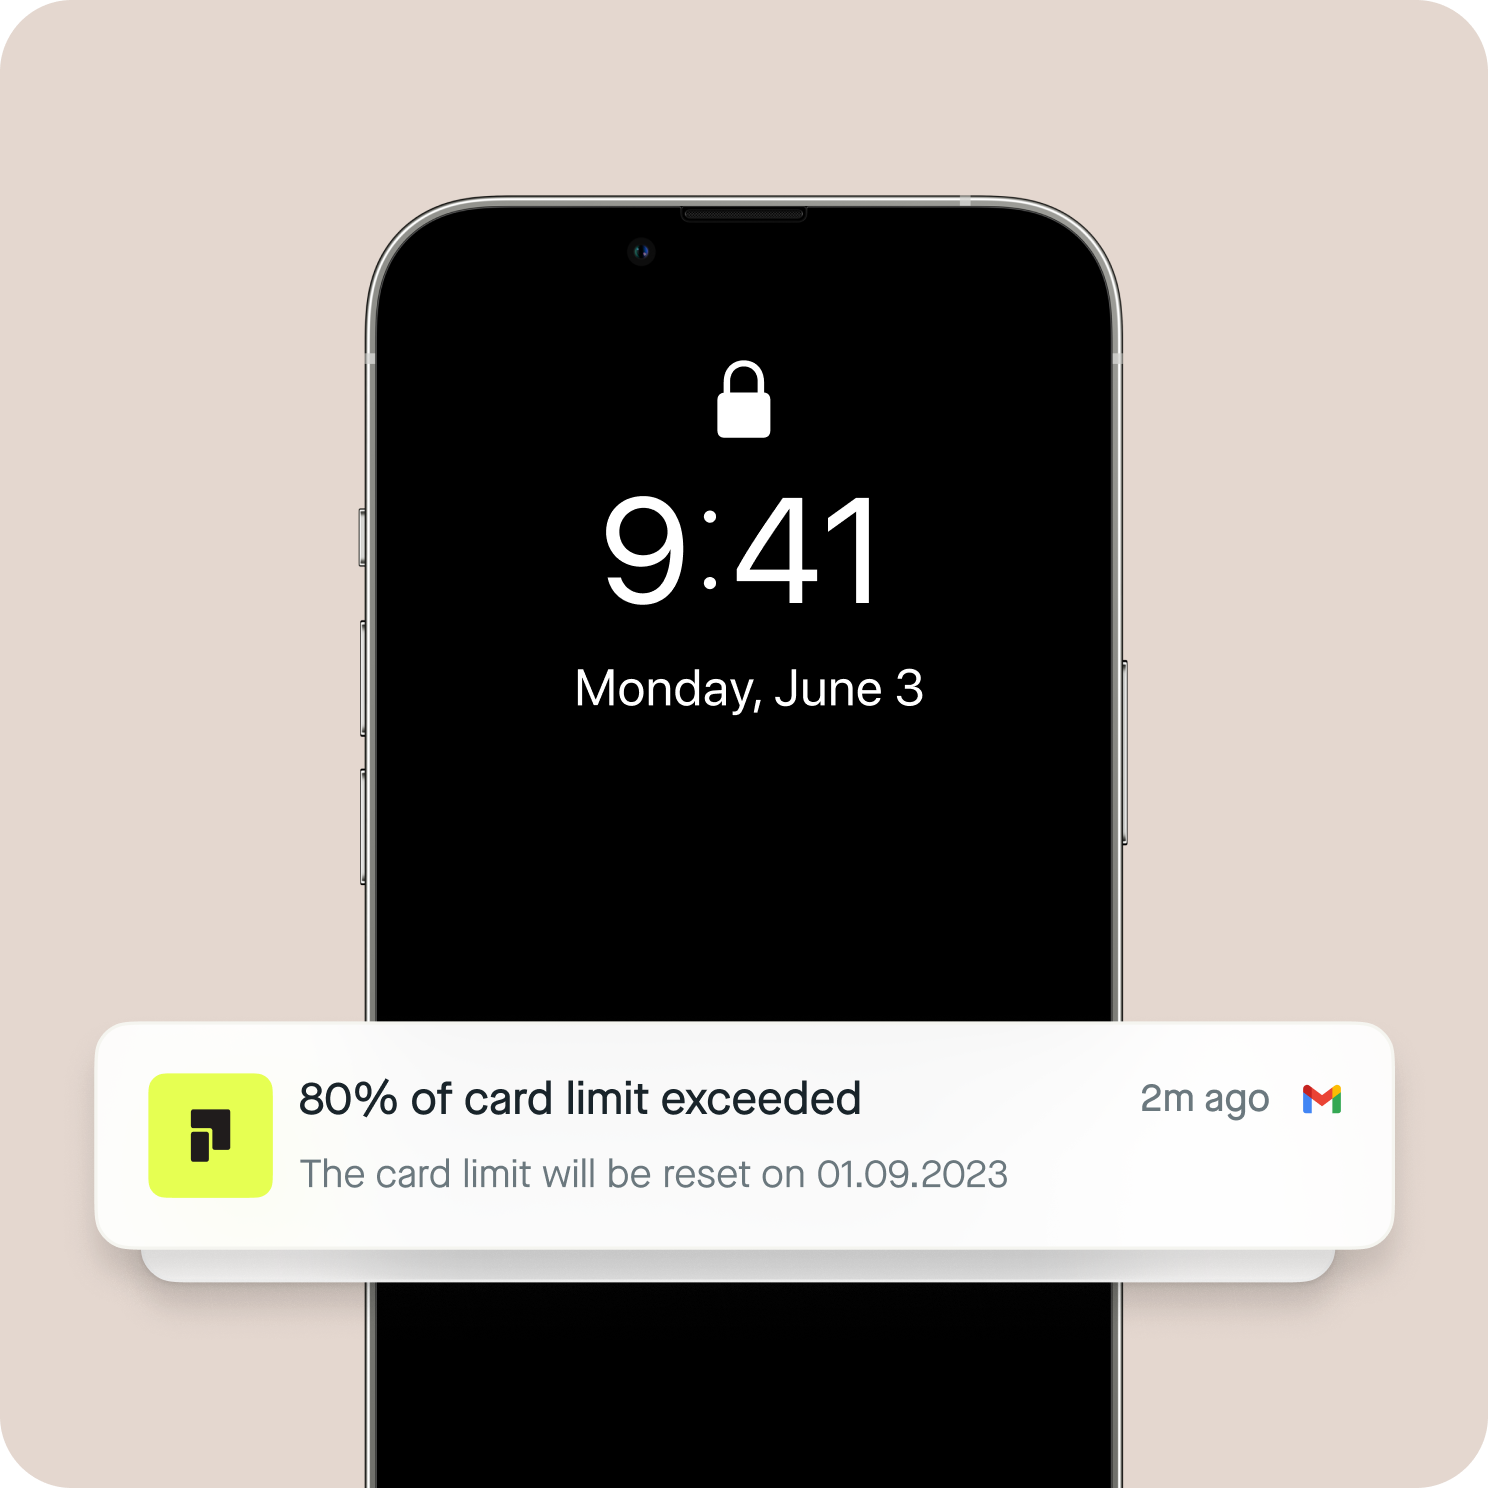 Pliant mobile app showing a notification "80% of card limit exceeded"